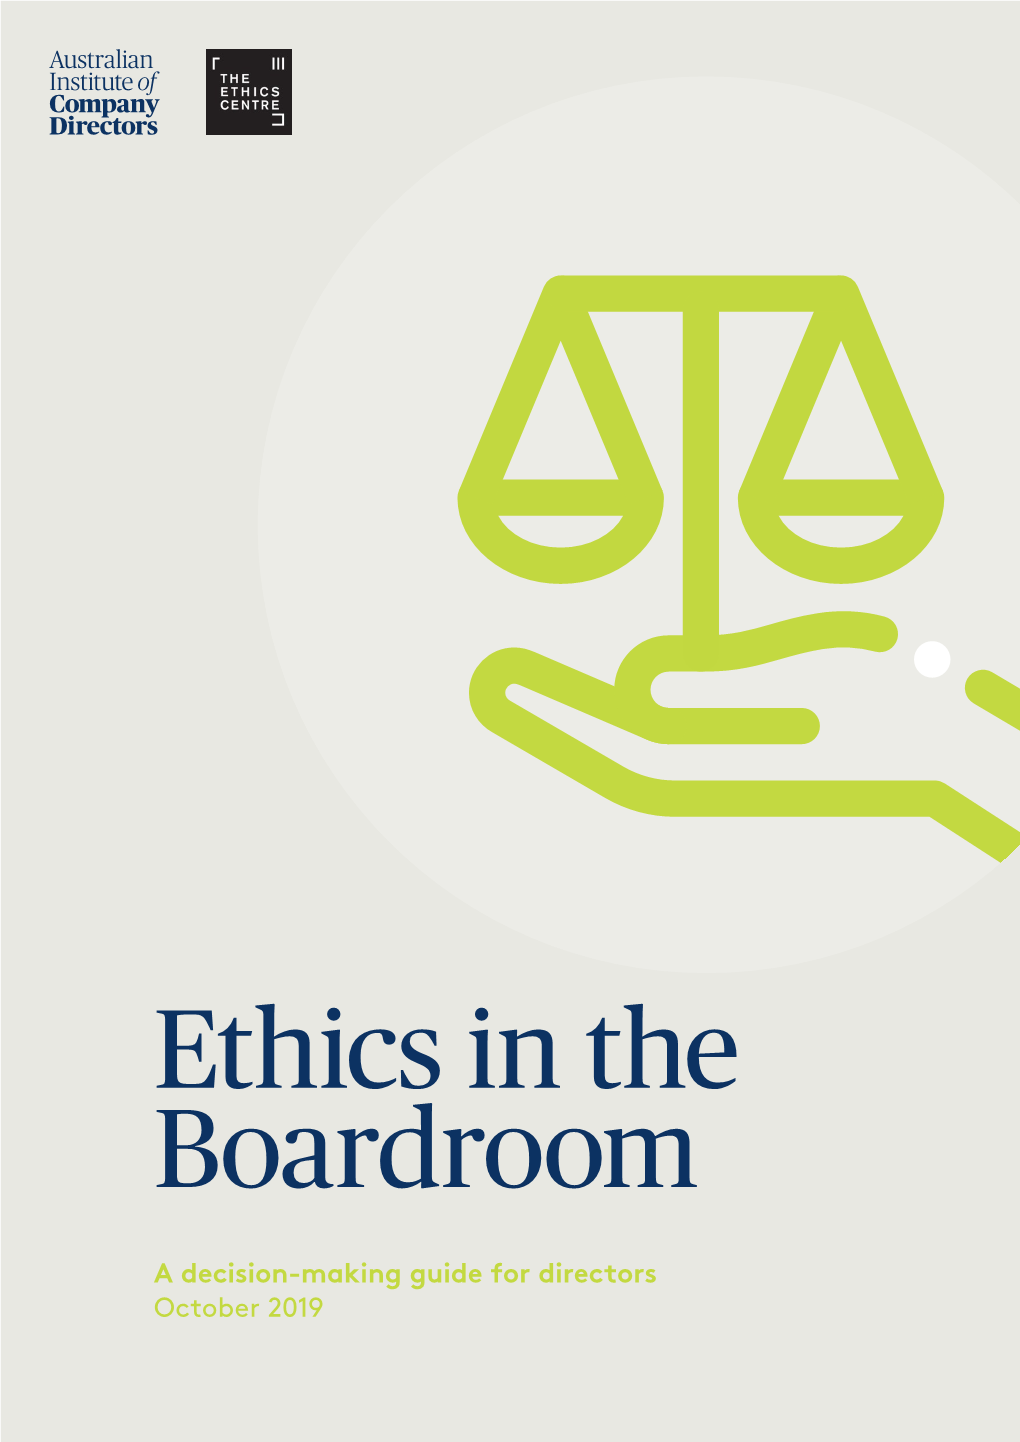 Ethics in the Boardroom